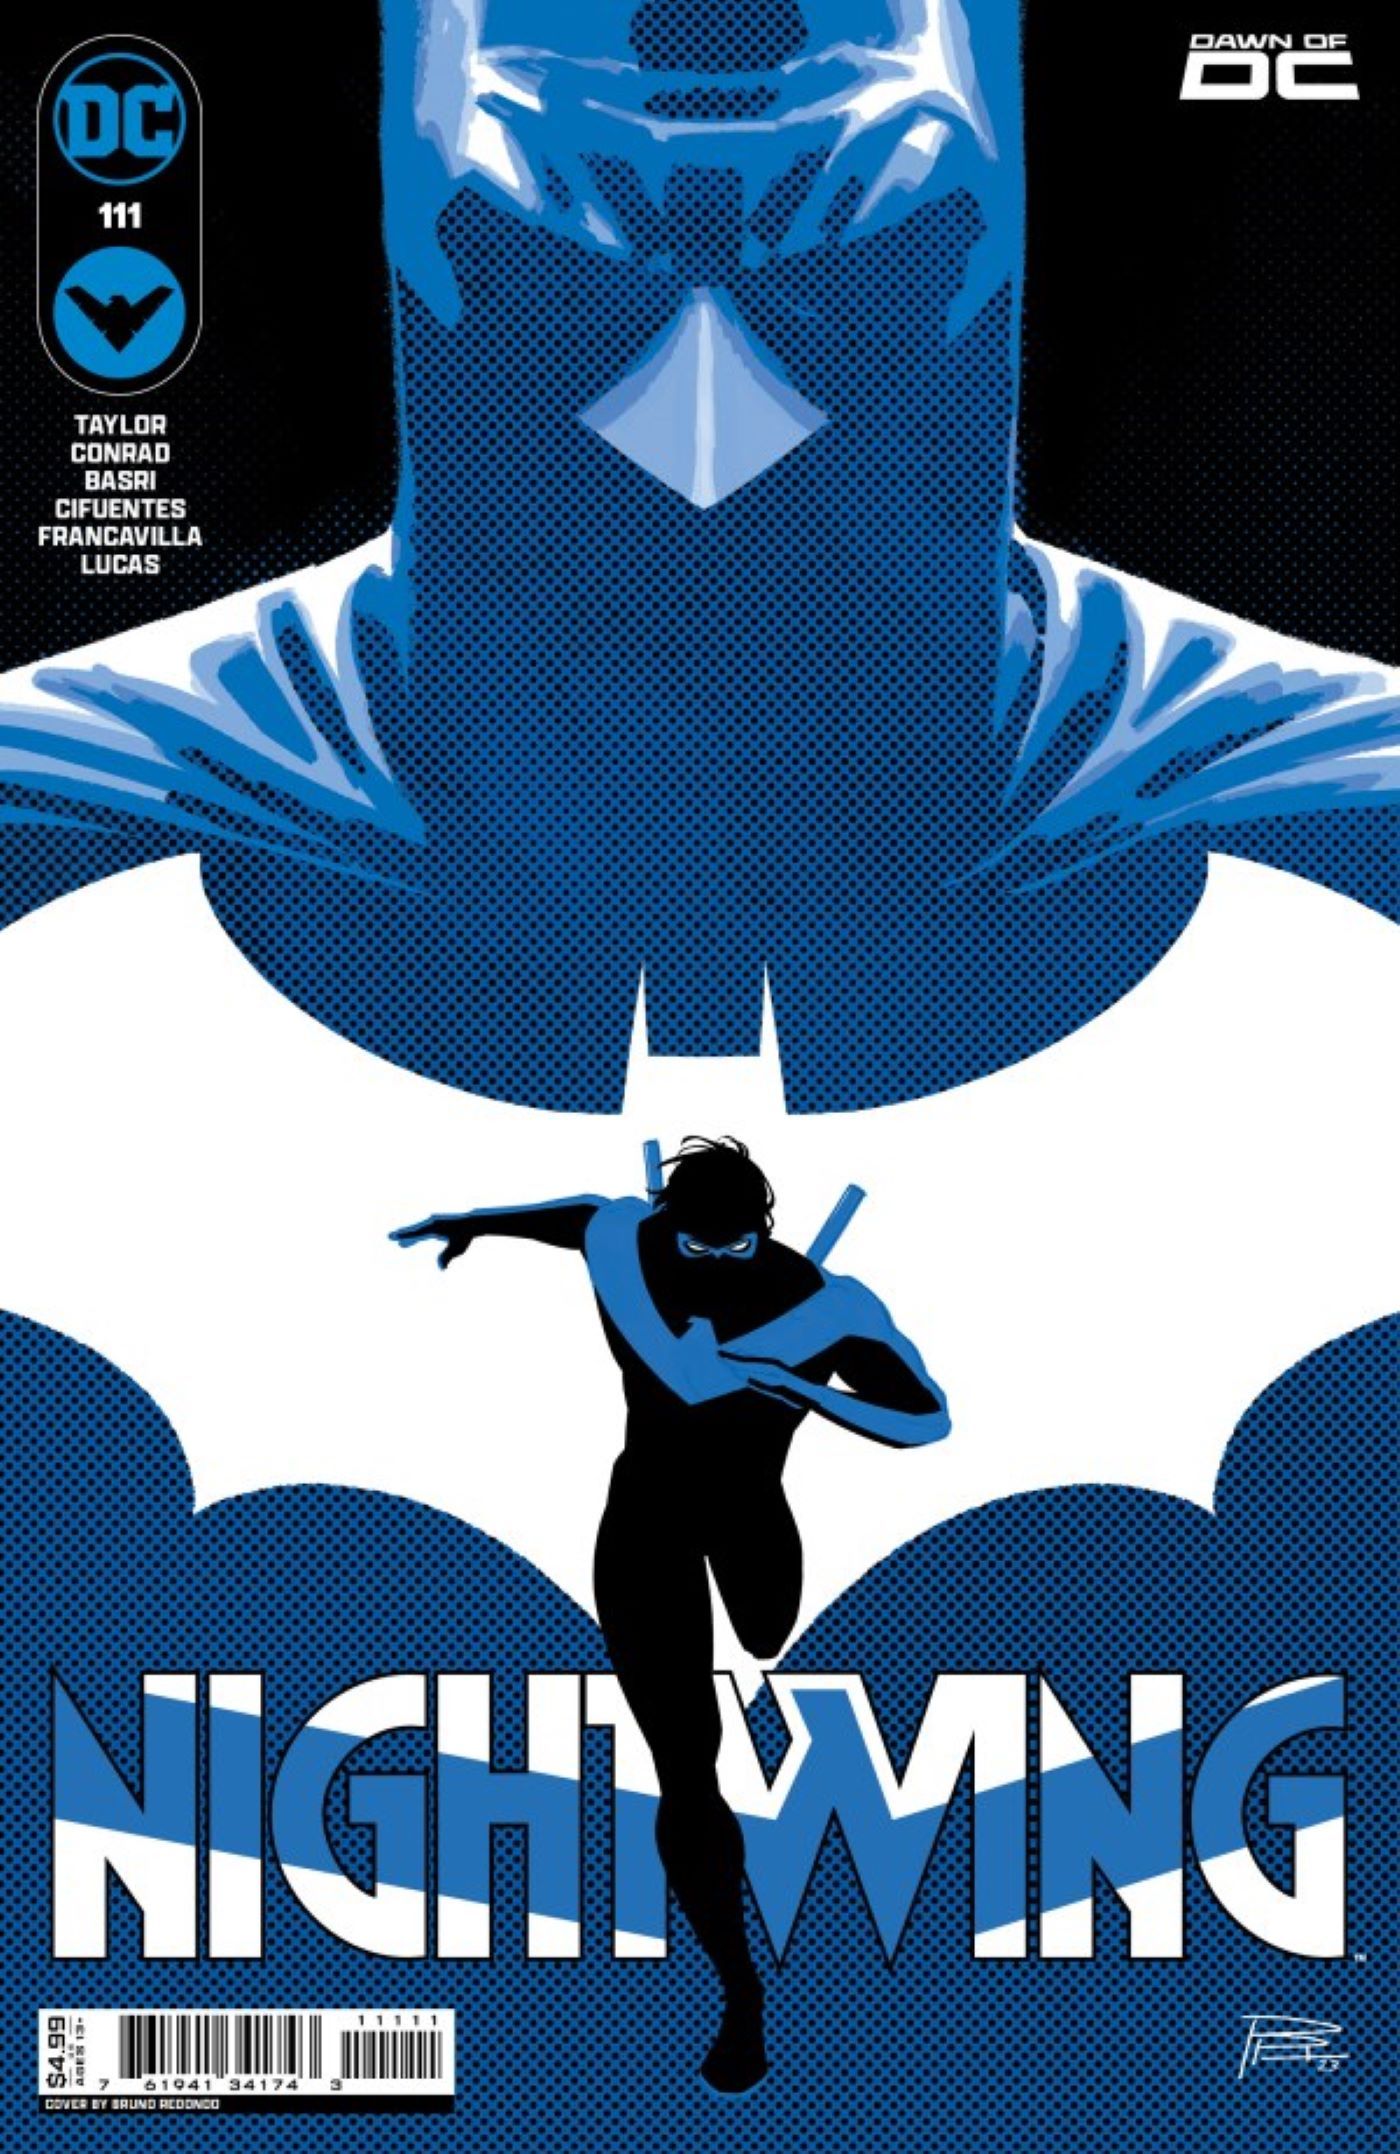 Nightwing #111 featuring Dick Grayson and Batman sillouette